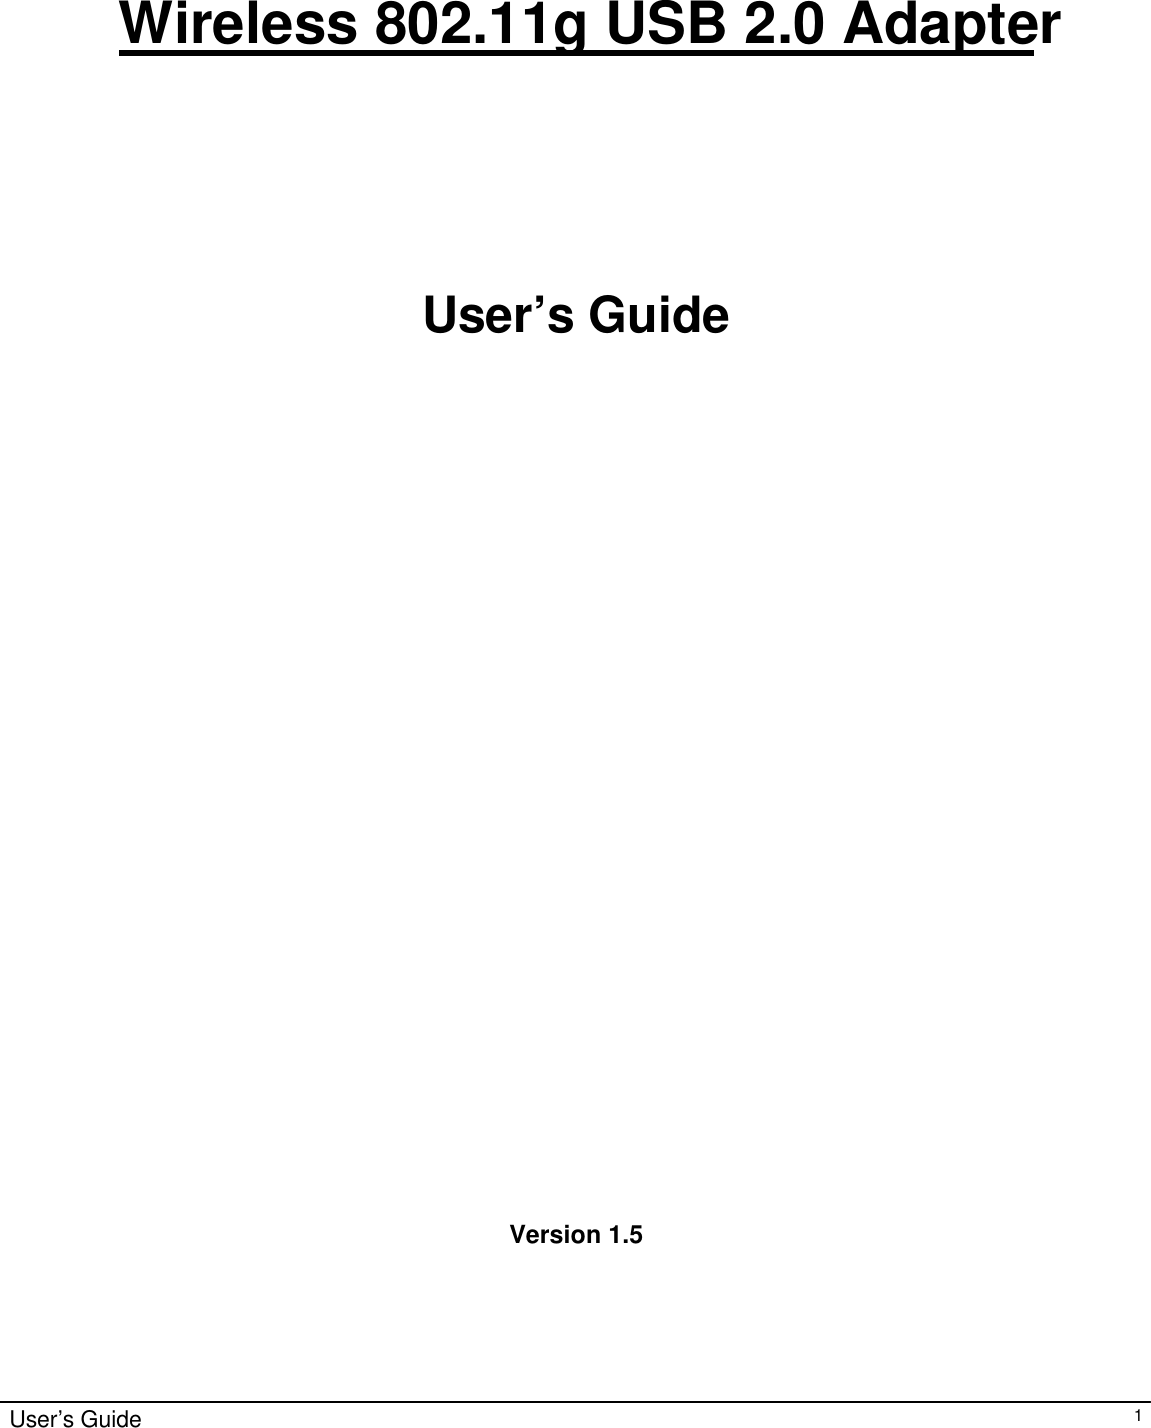                                                                                                                                                                                                                                                                                                                                        User’s Guide   1    Wireless 802.11g USB 2.0 Adapter     User’s Guide                              Version 1.5   